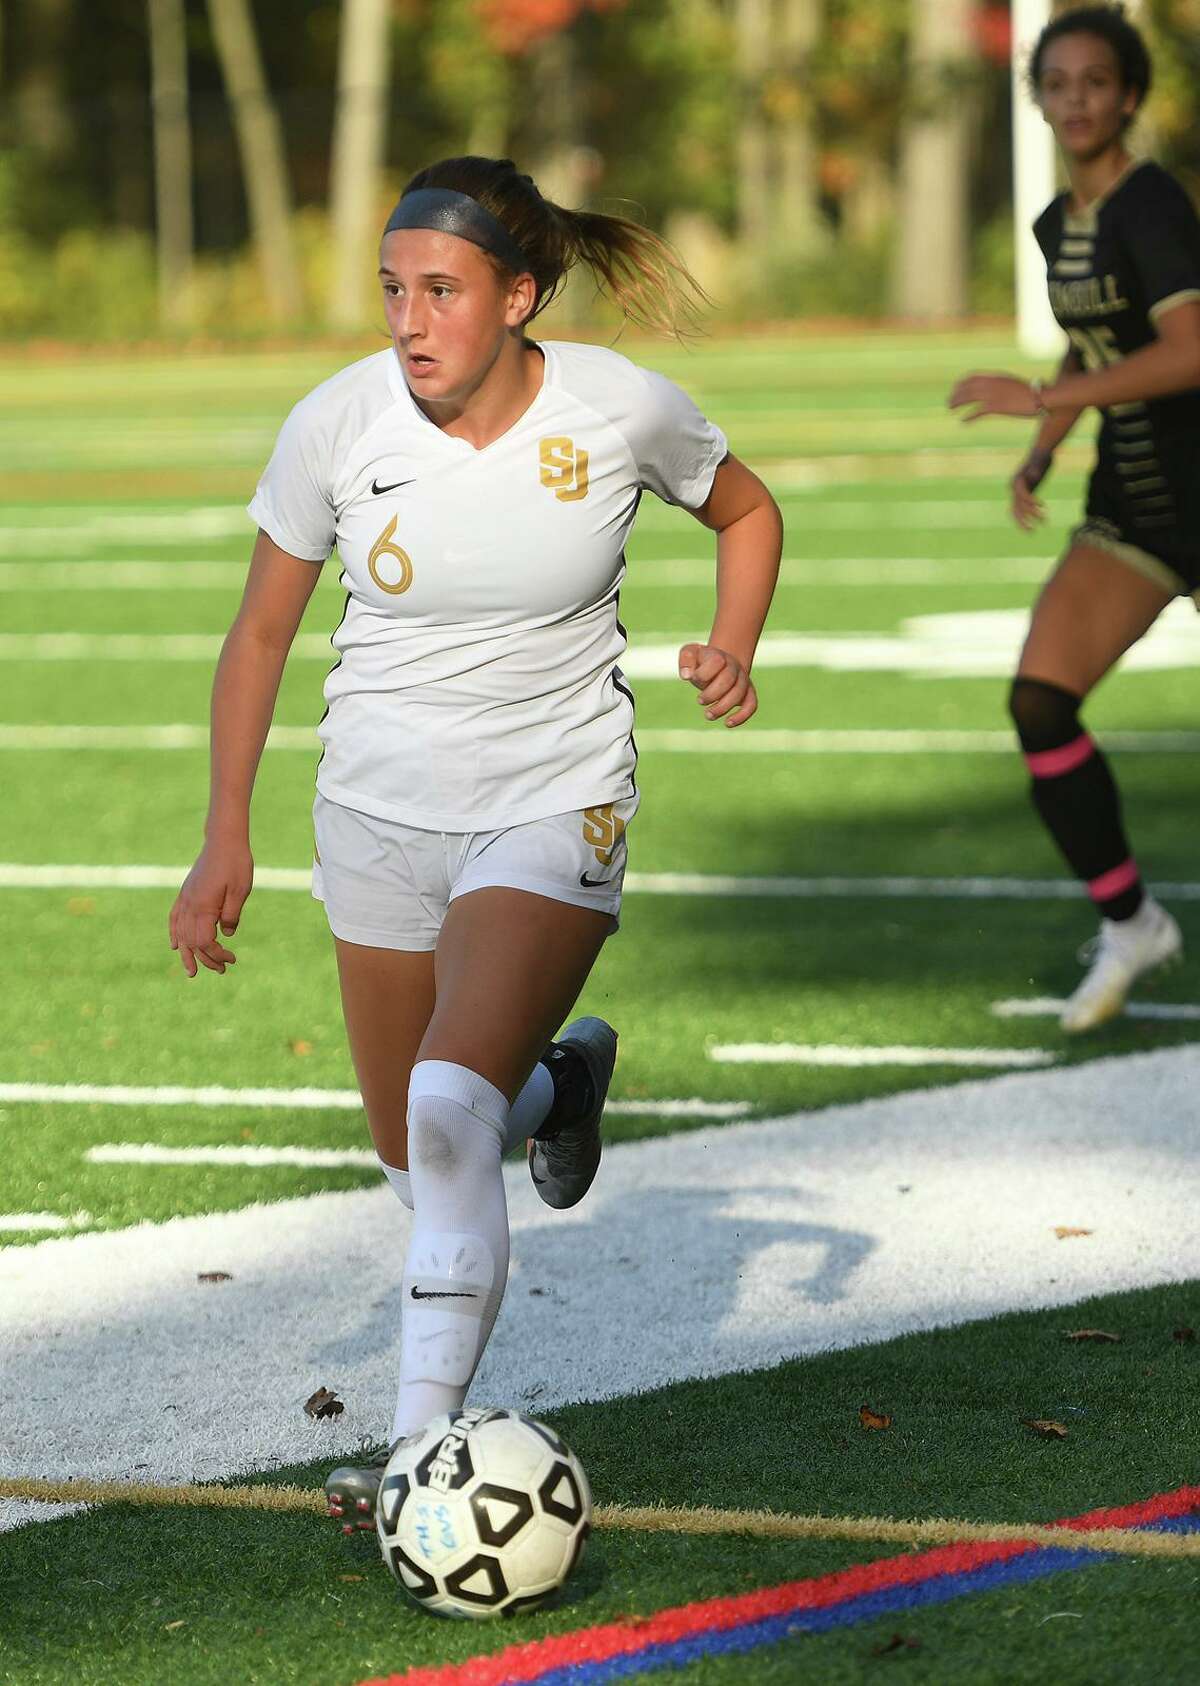 St. Joseph's Caroline Sheehan works the ball through midfield during their girls soccer match at rival Trumbull High School in Trumbull, Conn. on Thursday, October 15, 2020.